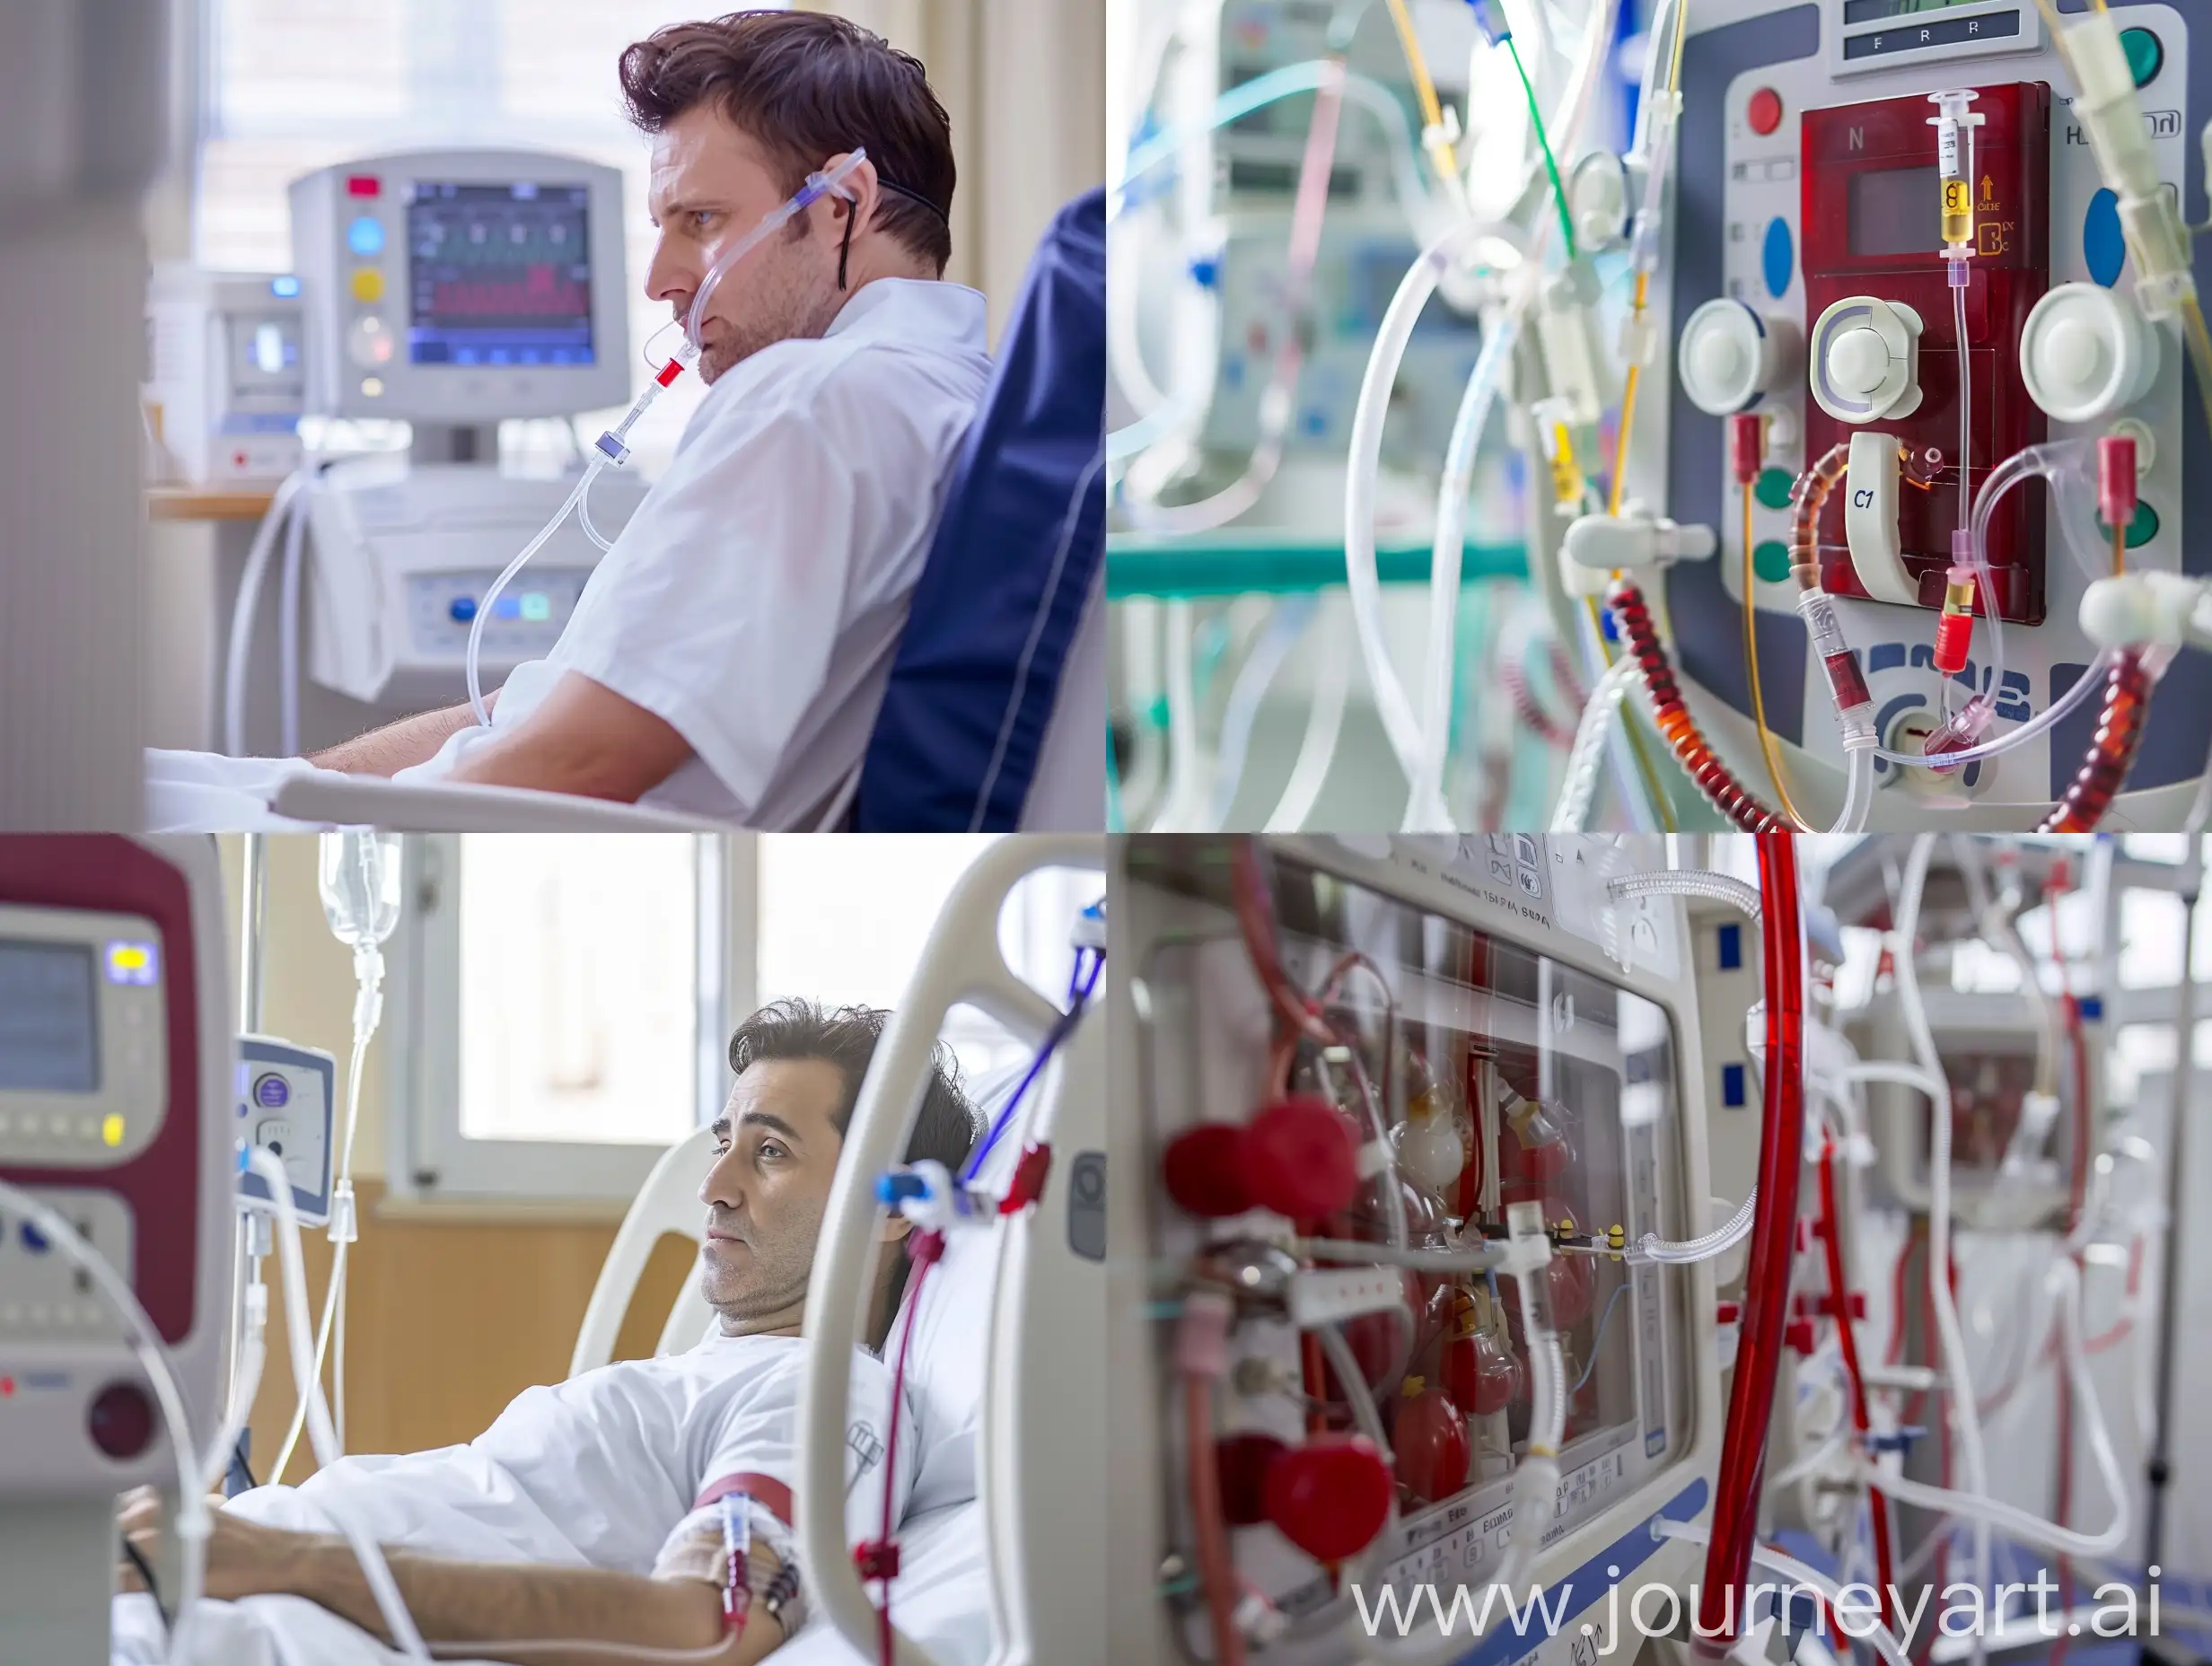 Professional-Hemodialysis-Treatment-in-Clinical-Setting